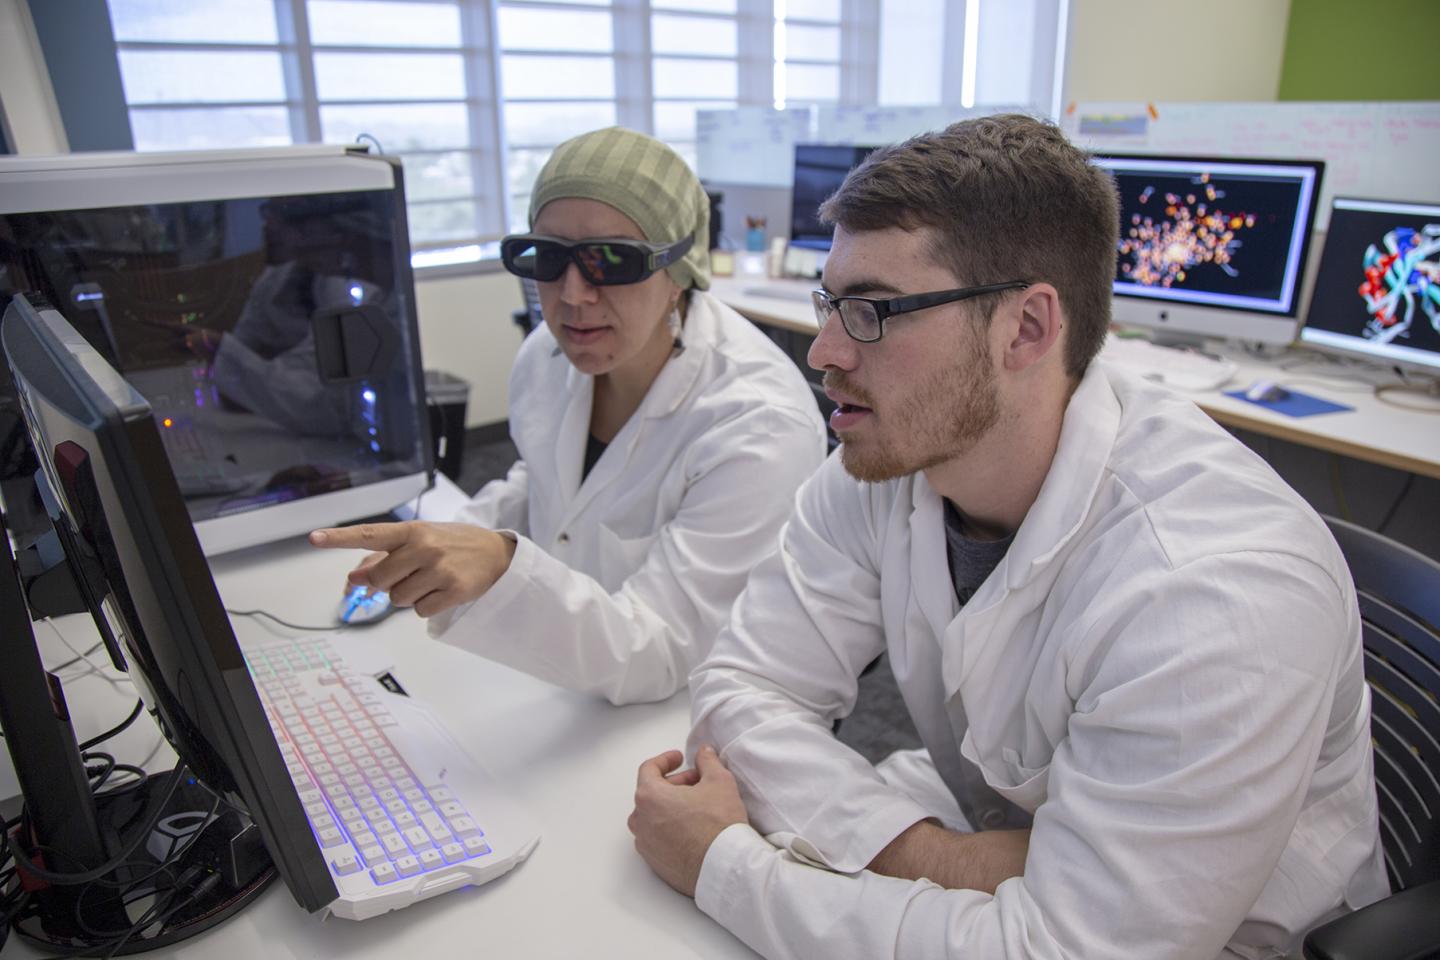 May Khanna, PhD, left, uses 3D glasses to help visualize a molecule created in her lab.